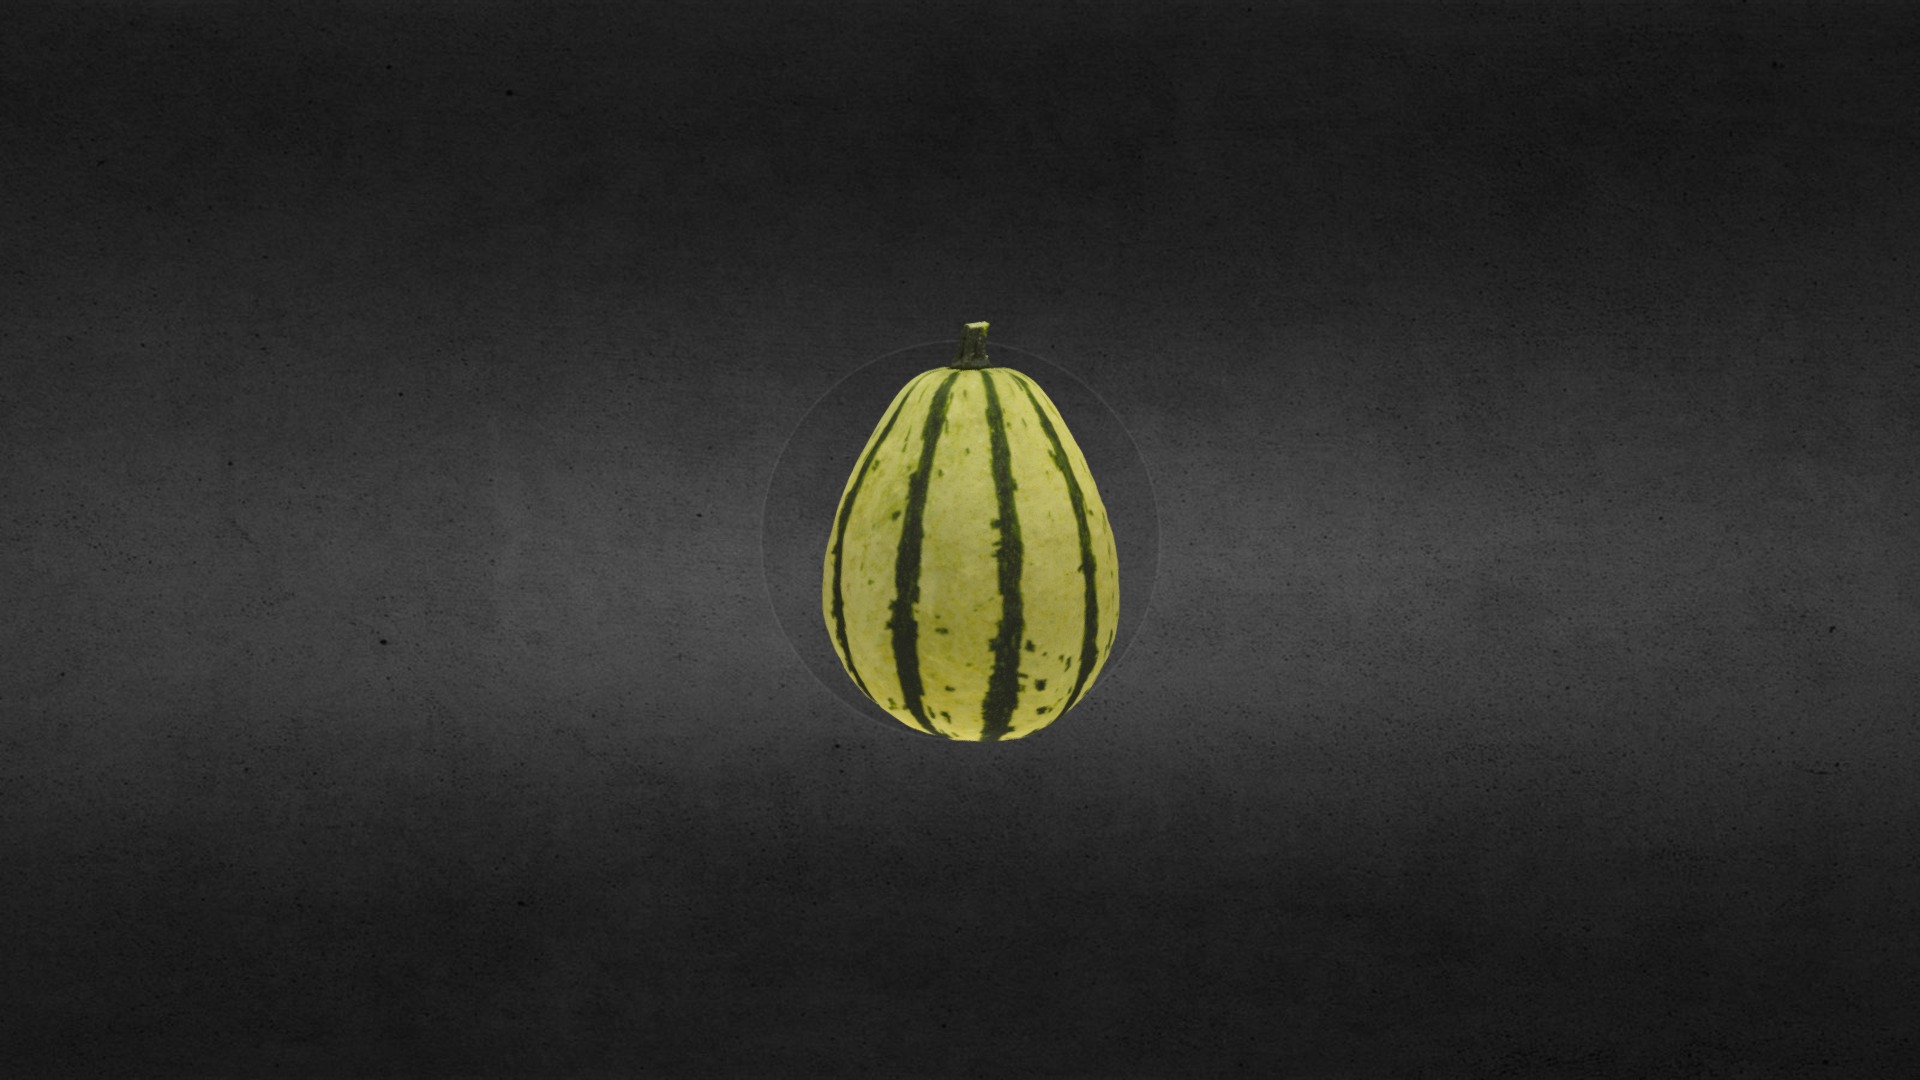 3D model Pumpkin 2 High resolution - This is a 3D model of the Pumpkin 2 High resolution. The 3D model is about a yellow and black logo.